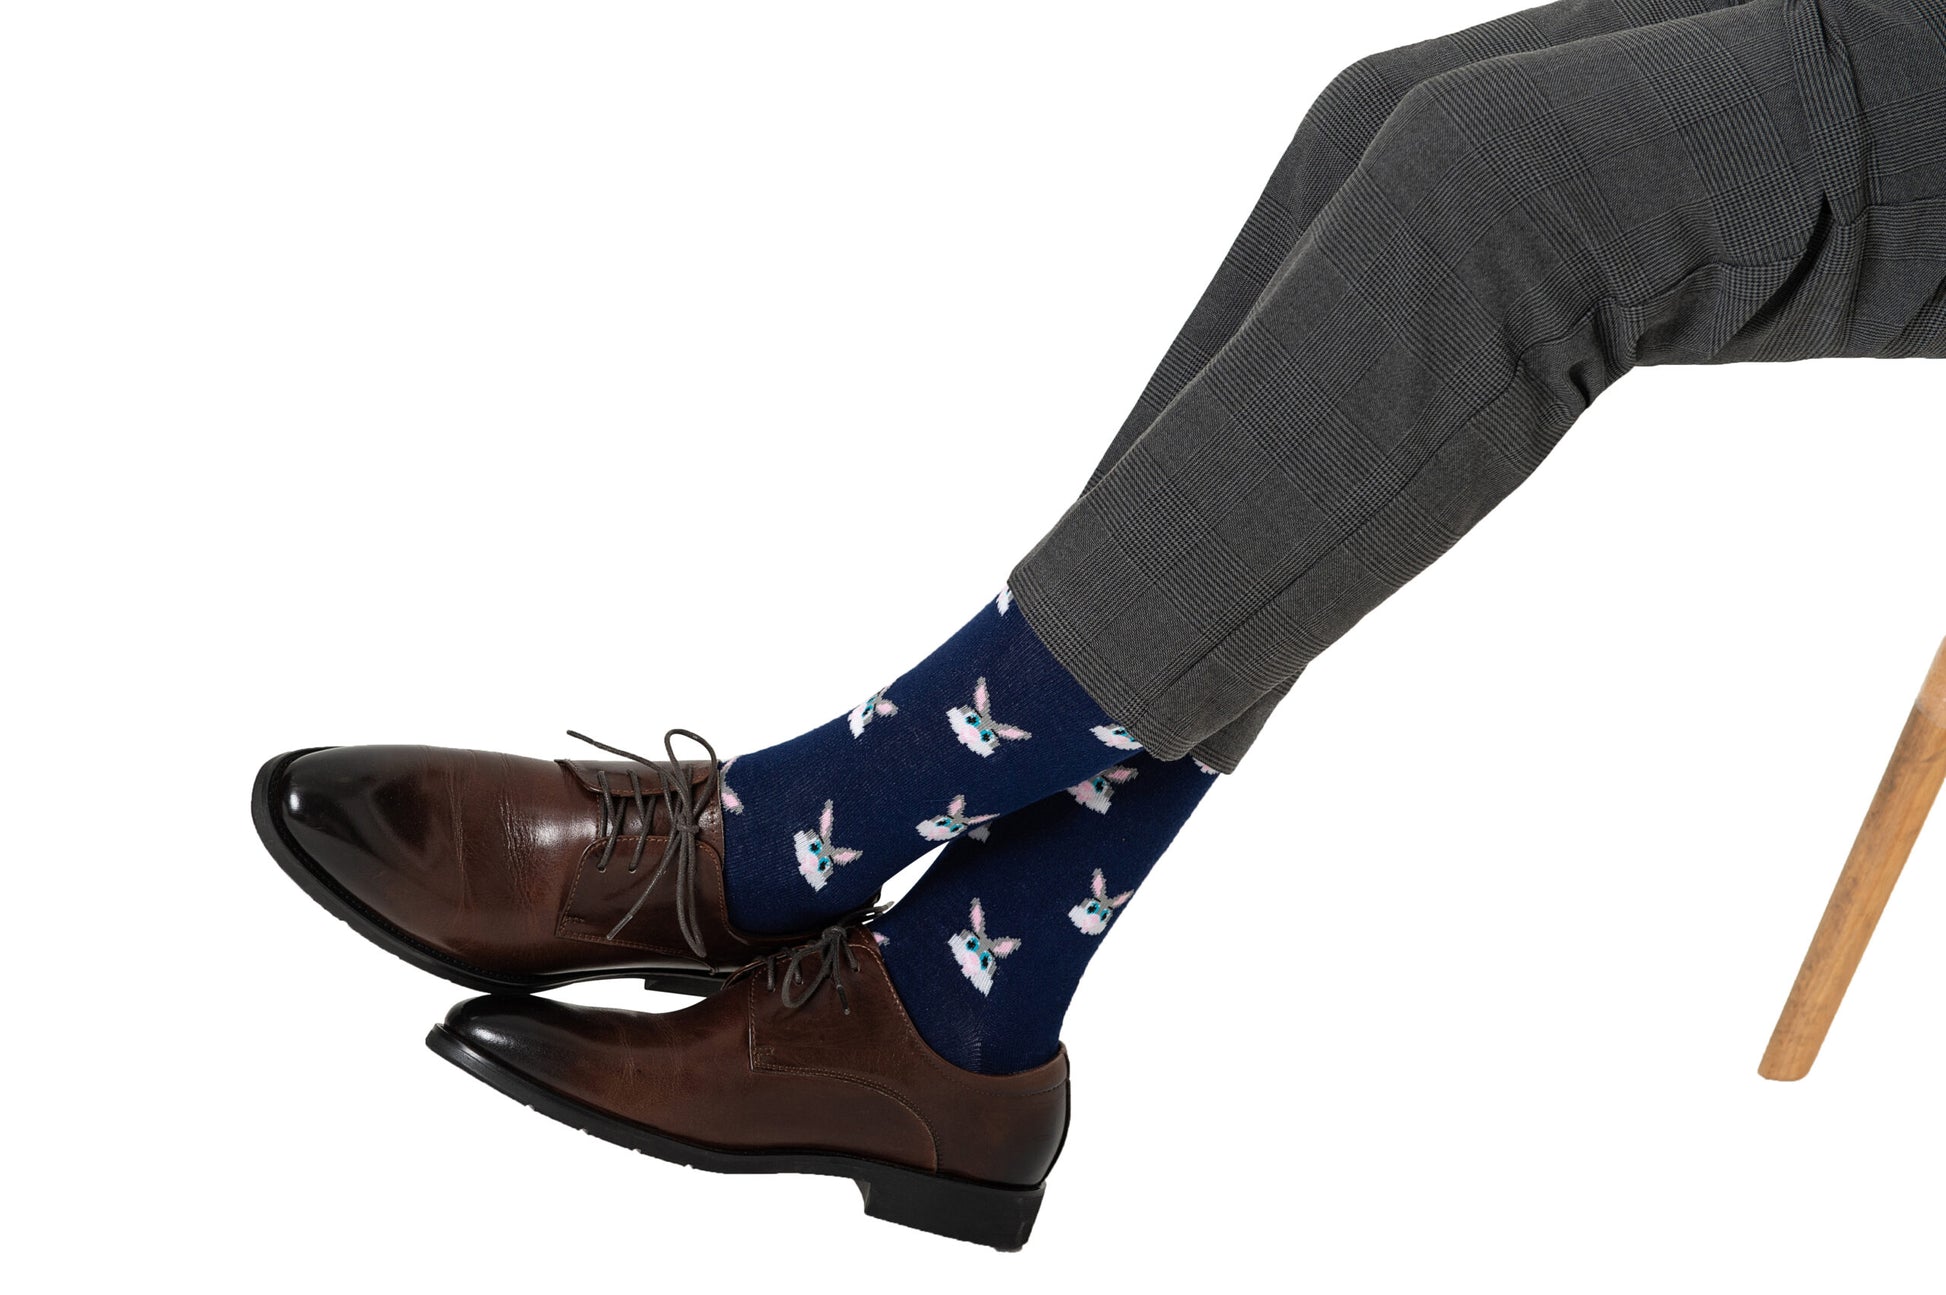 A pair of legs wearing brown shoes with blue socks and white Bunny Socks showcasing a playful collection of unique patterns.